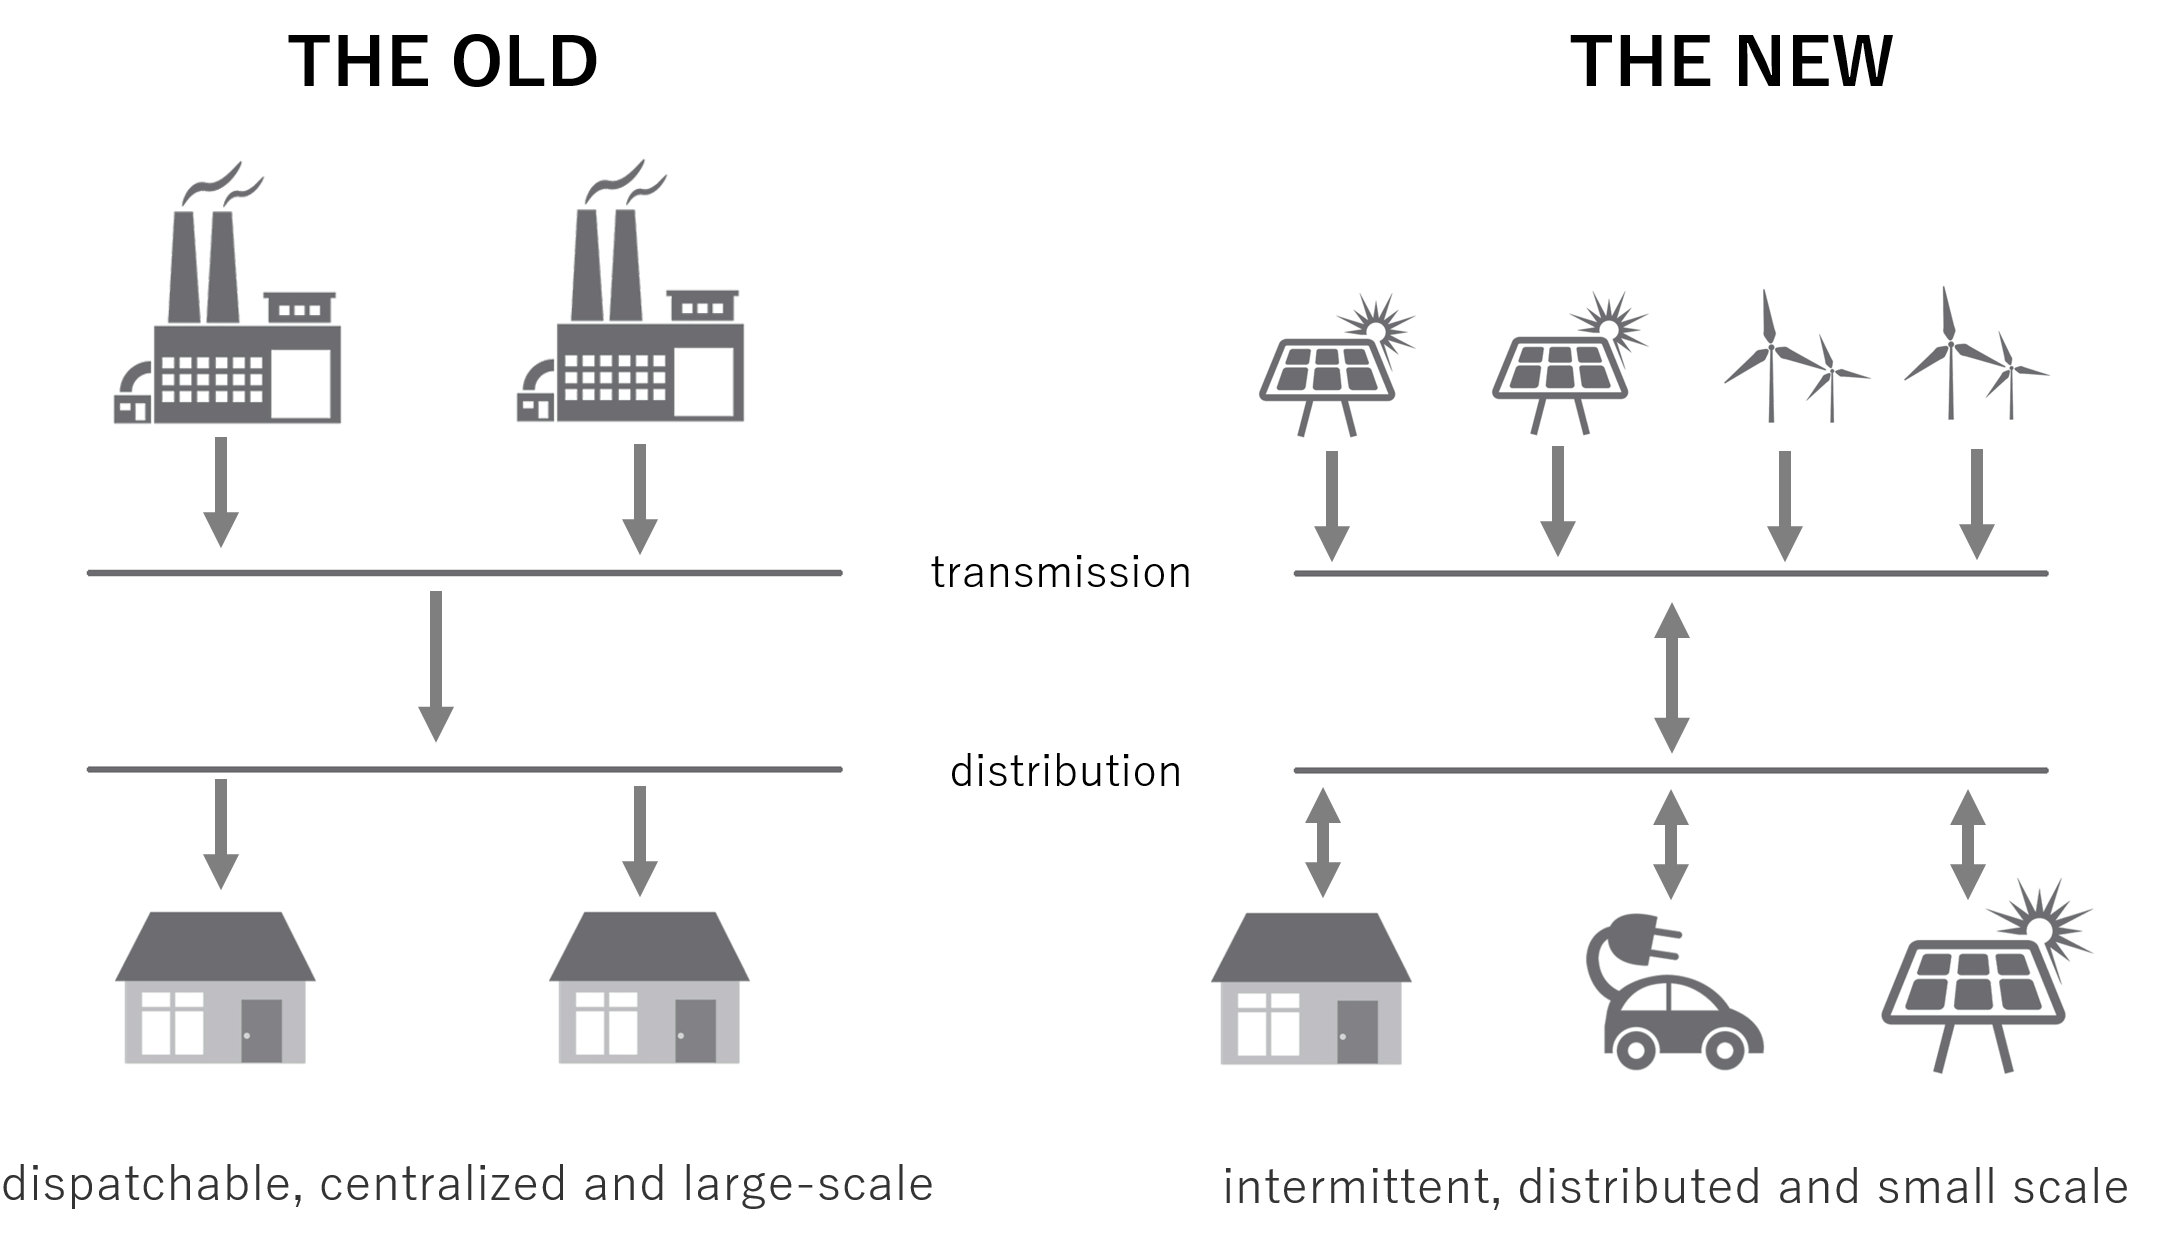 Figure 1 - Our current energy transition is moving us away from dispatchable, centralized and large-scale generation towards intermittent, distributed and small scale generation.